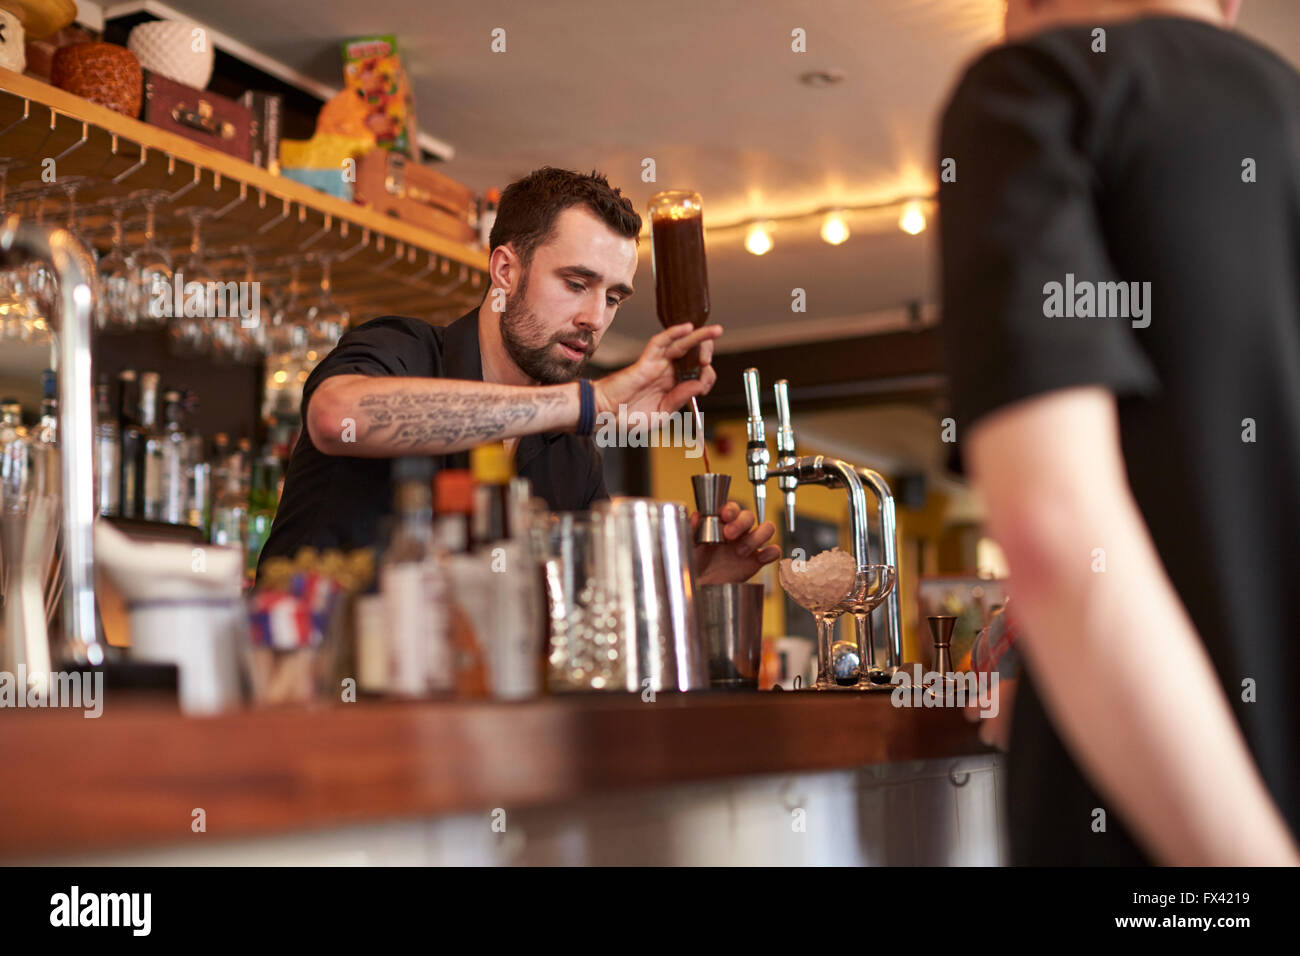 Bartender Giving Cocktail Making Lesson to Friends In Bar Stock Photo